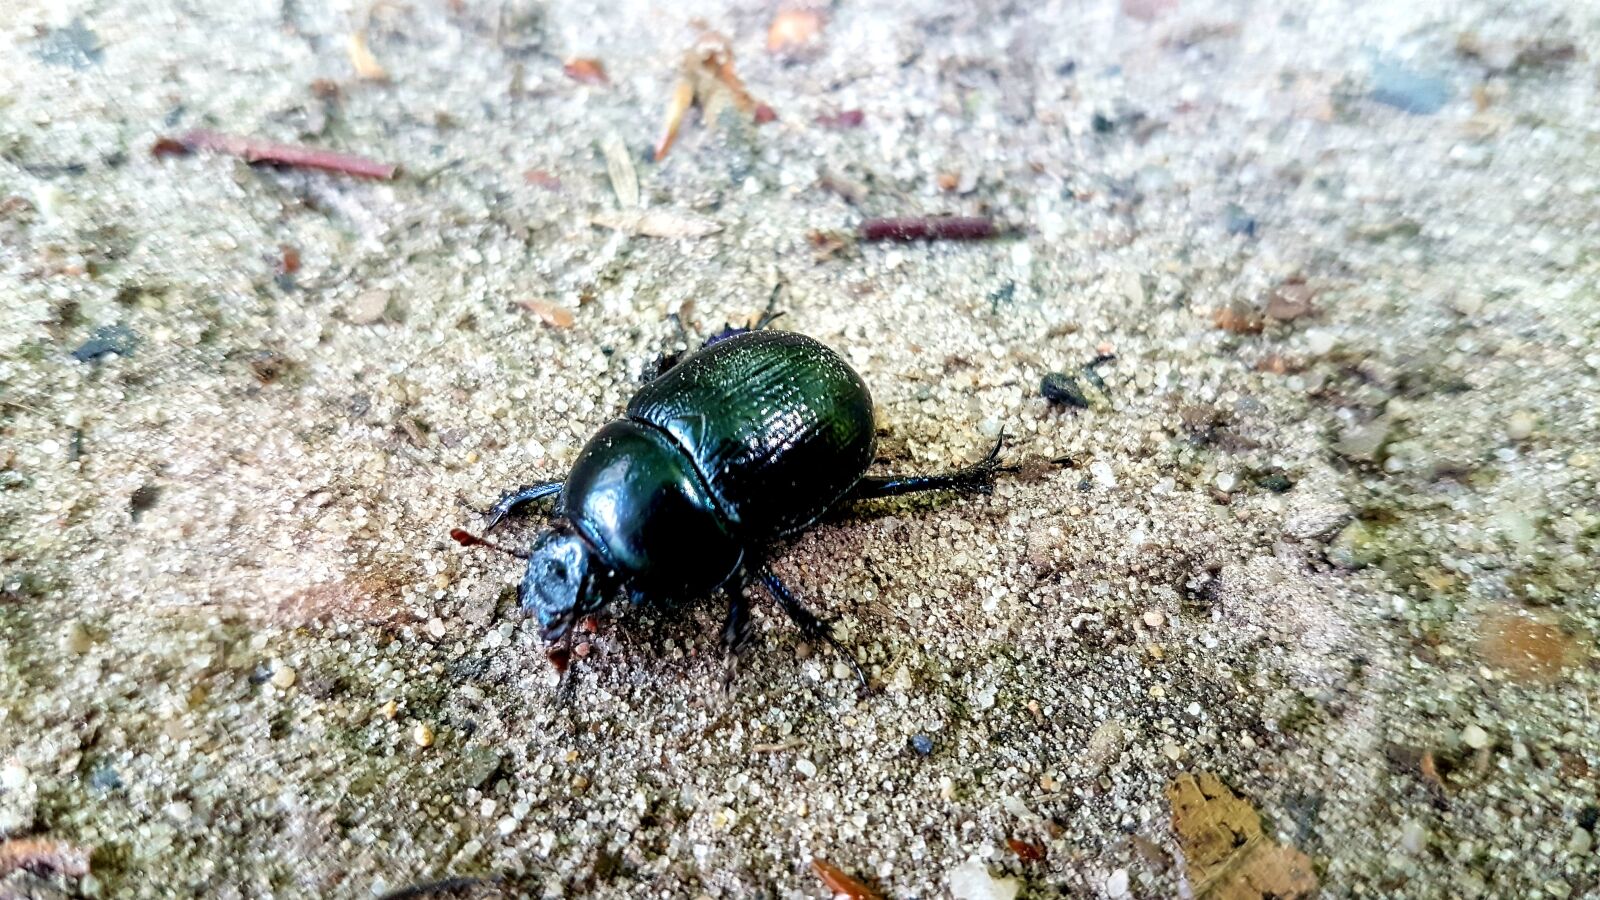 Samsung Galaxy S7 sample photo. Beetle, insect, nature photography